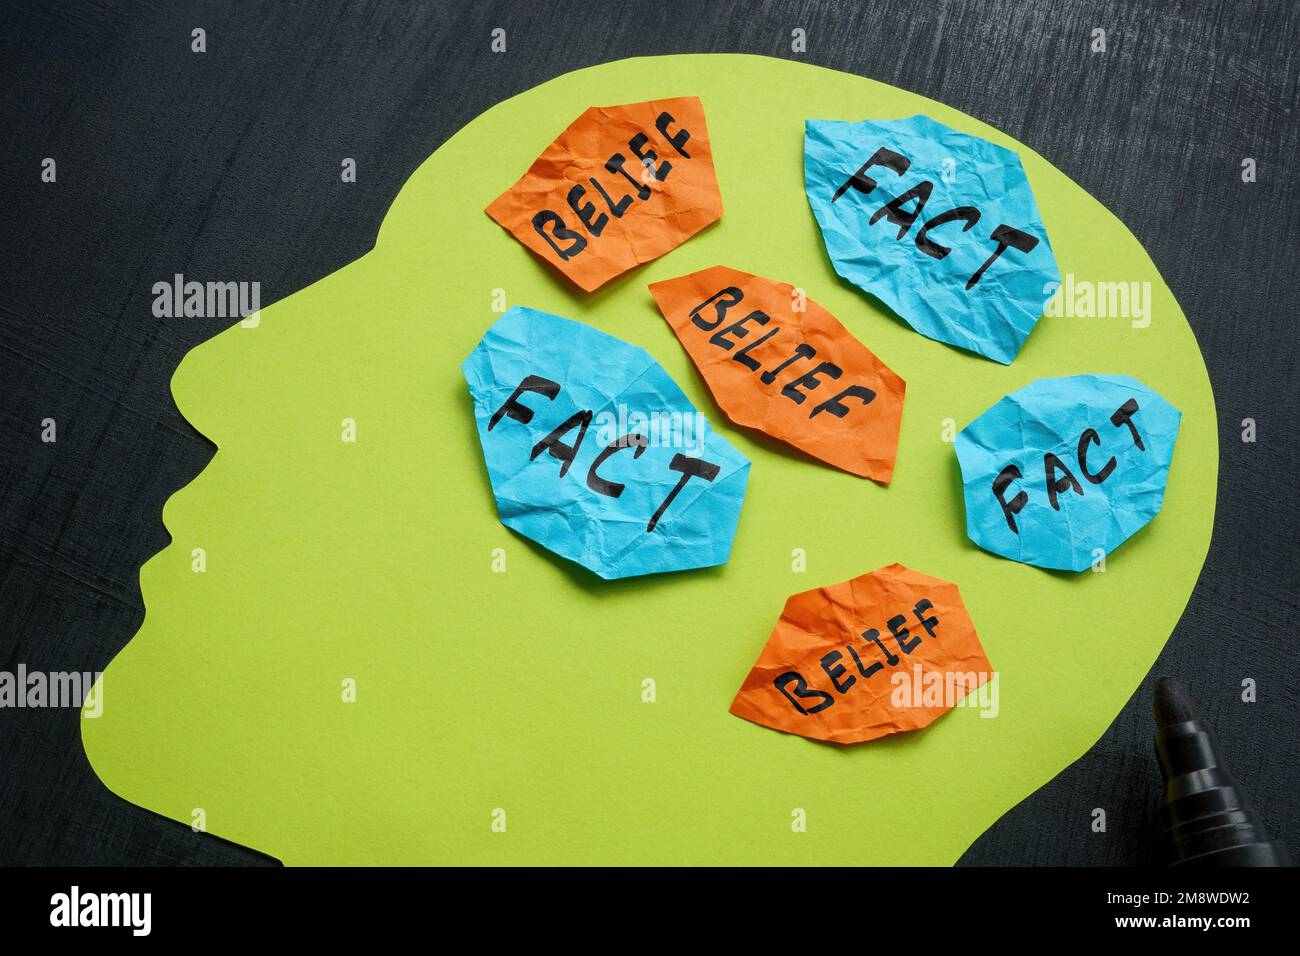 Bias concept. Paper head and pieces of paper with signs belief and fact. Stock Photo